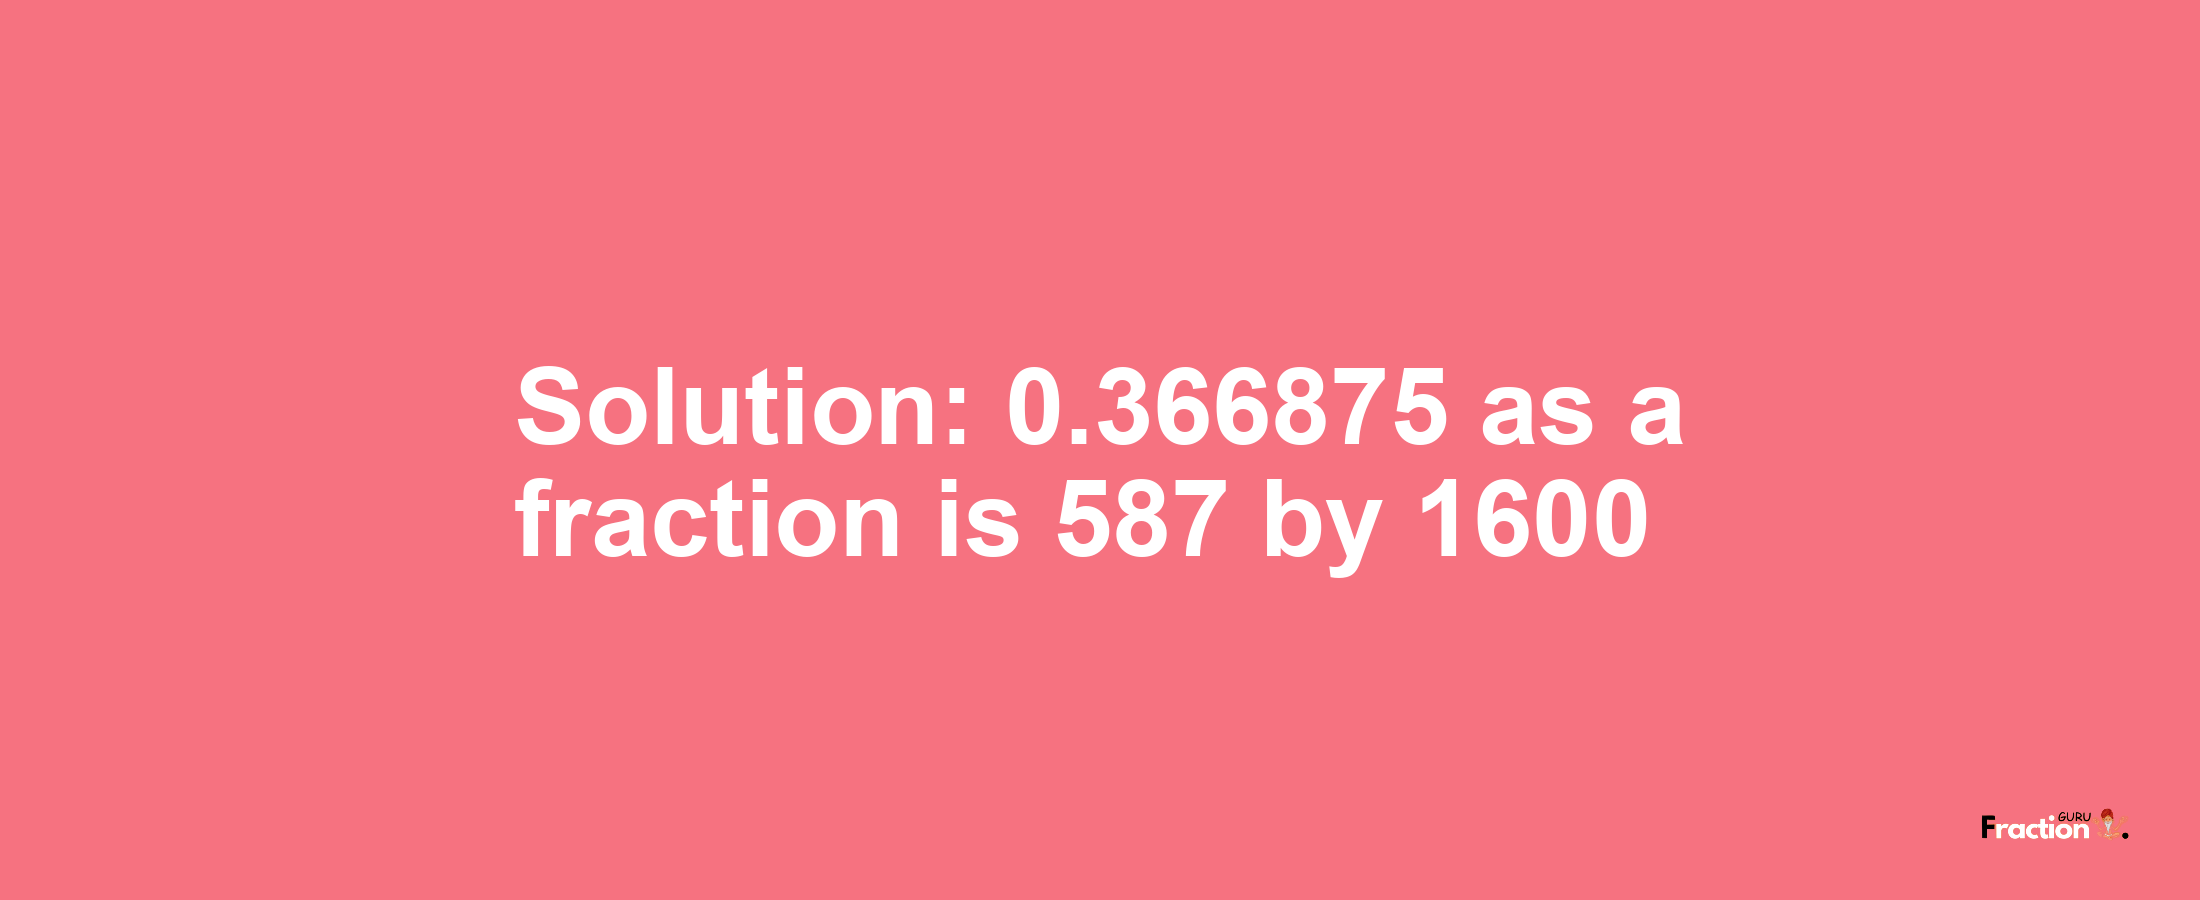 Solution:0.366875 as a fraction is 587/1600